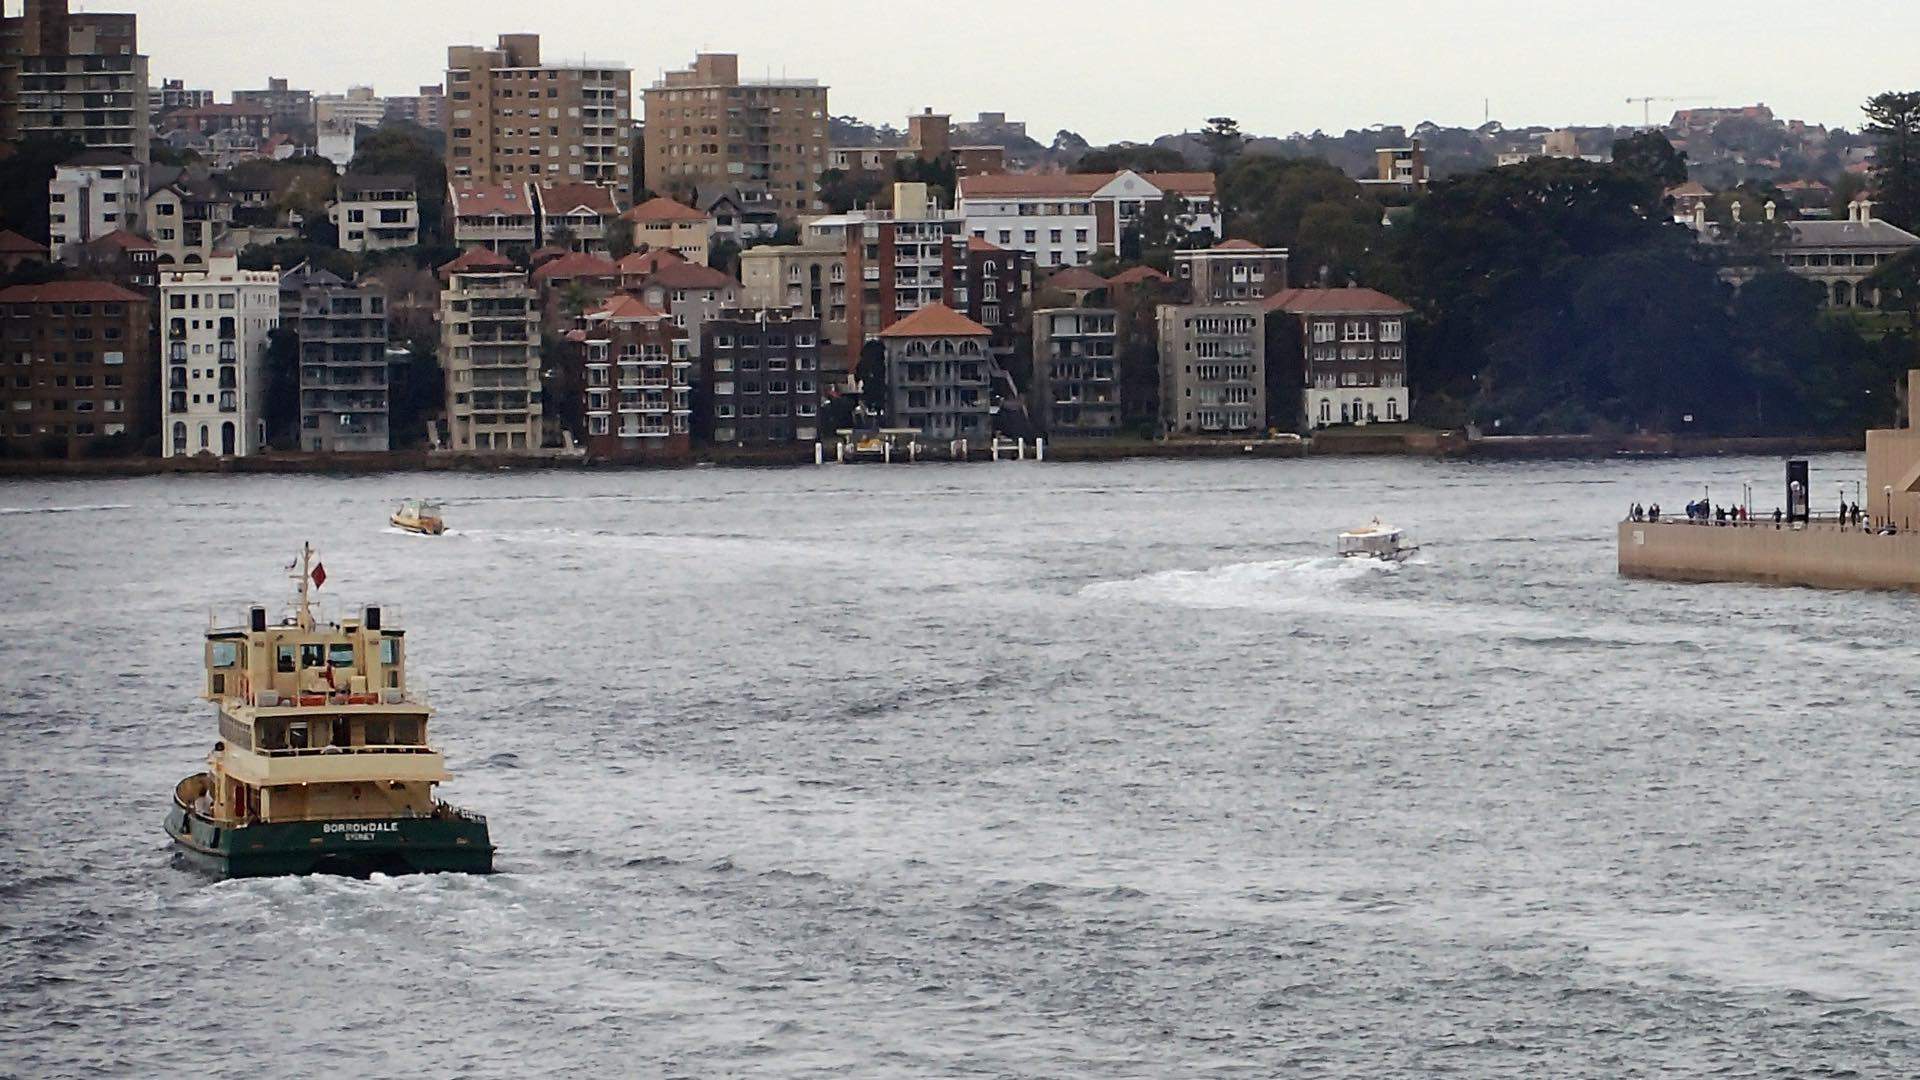 Ferries Between Circular Quay and Manly Have Been Cancelled Because of Huge Swell